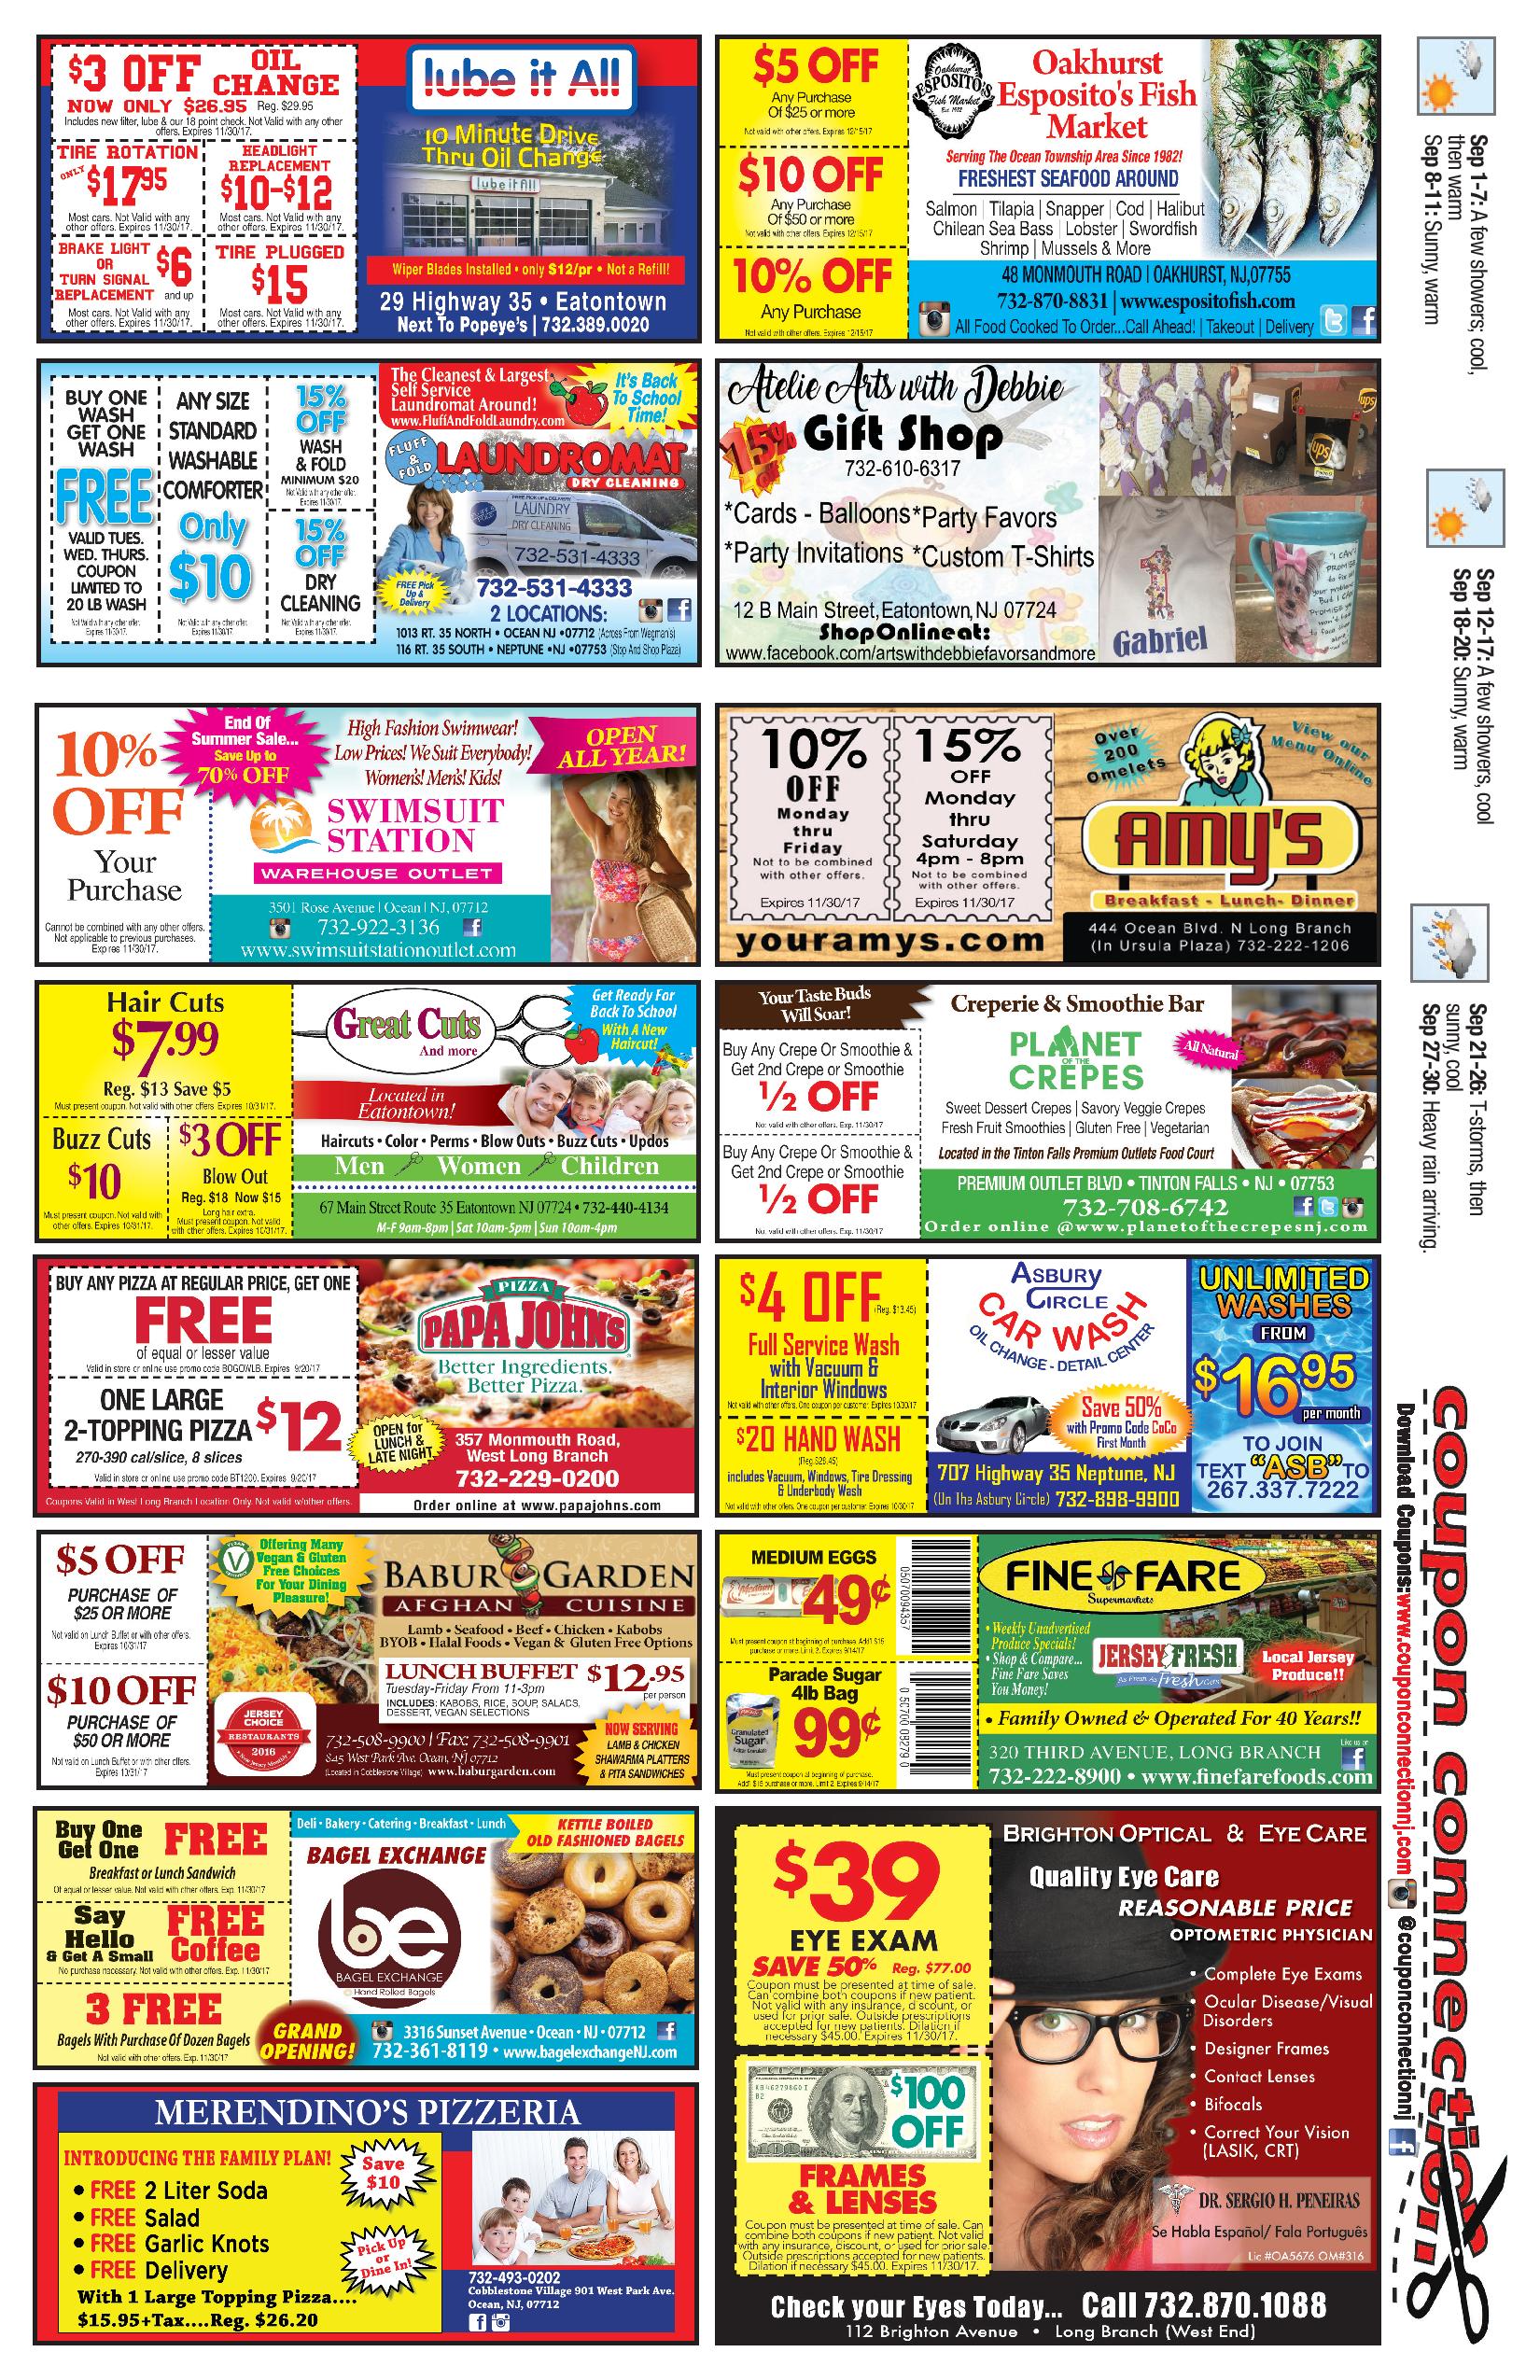 COUPON CONNECTION/BACK TO SCHOOL CONNECTION – Click to See Coupons